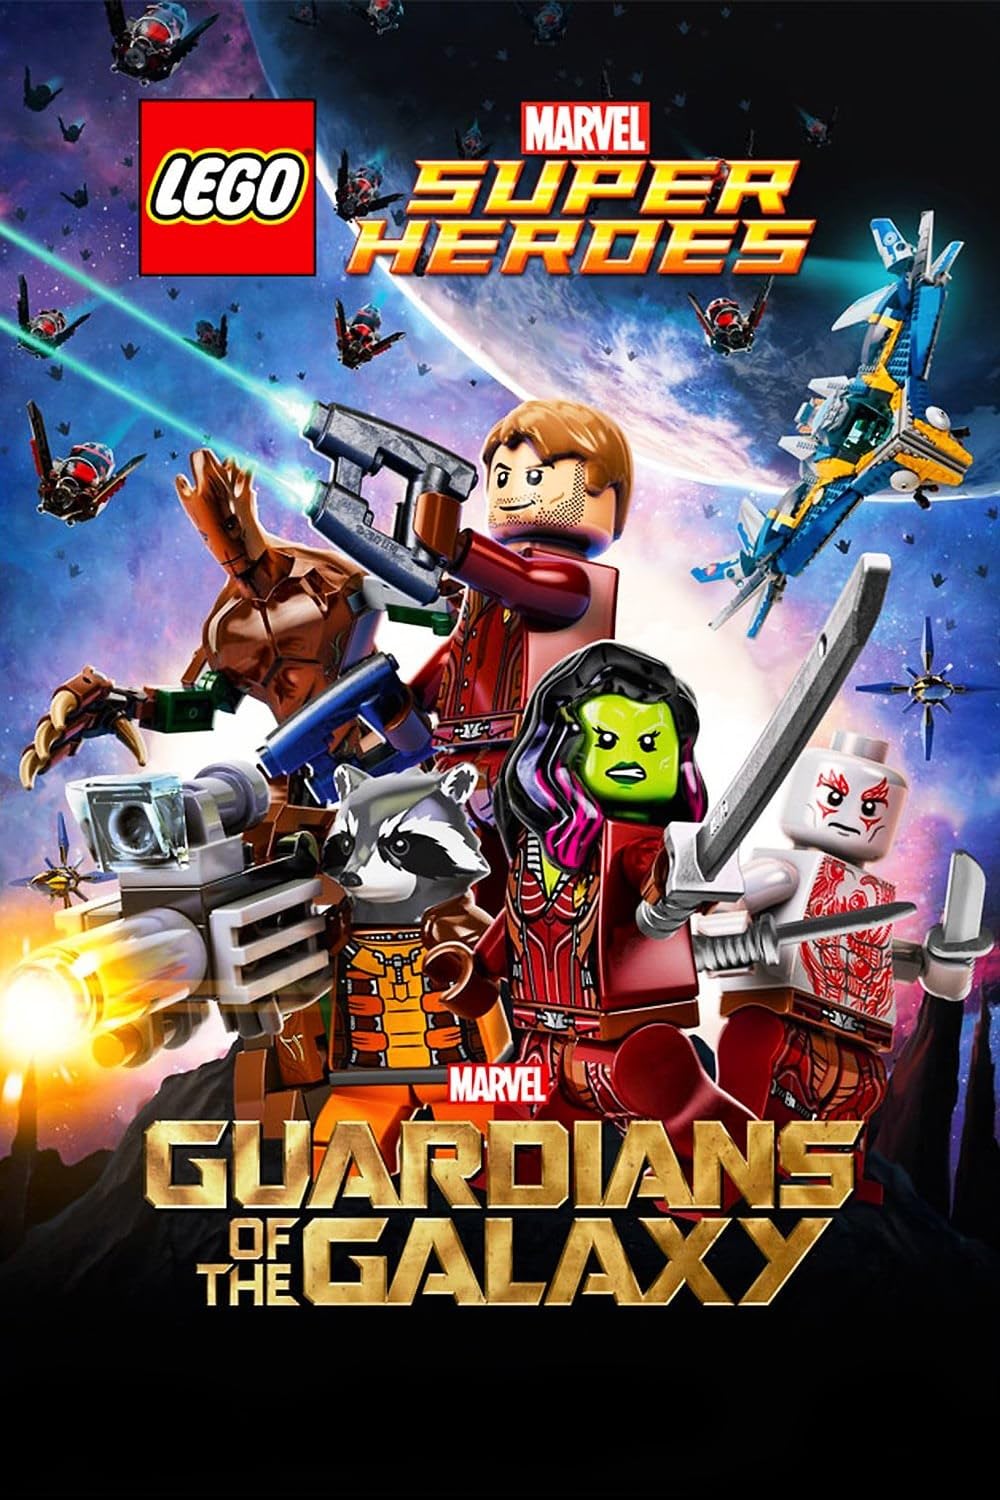 LEGO Marvel Super Heroes - Guardians of the Galaxy: The Thanos Threat (2017) 128Kbps 23.976Fps 48Khz 2.0Ch DD+ NF E-AC3 Turkish Audio TAC